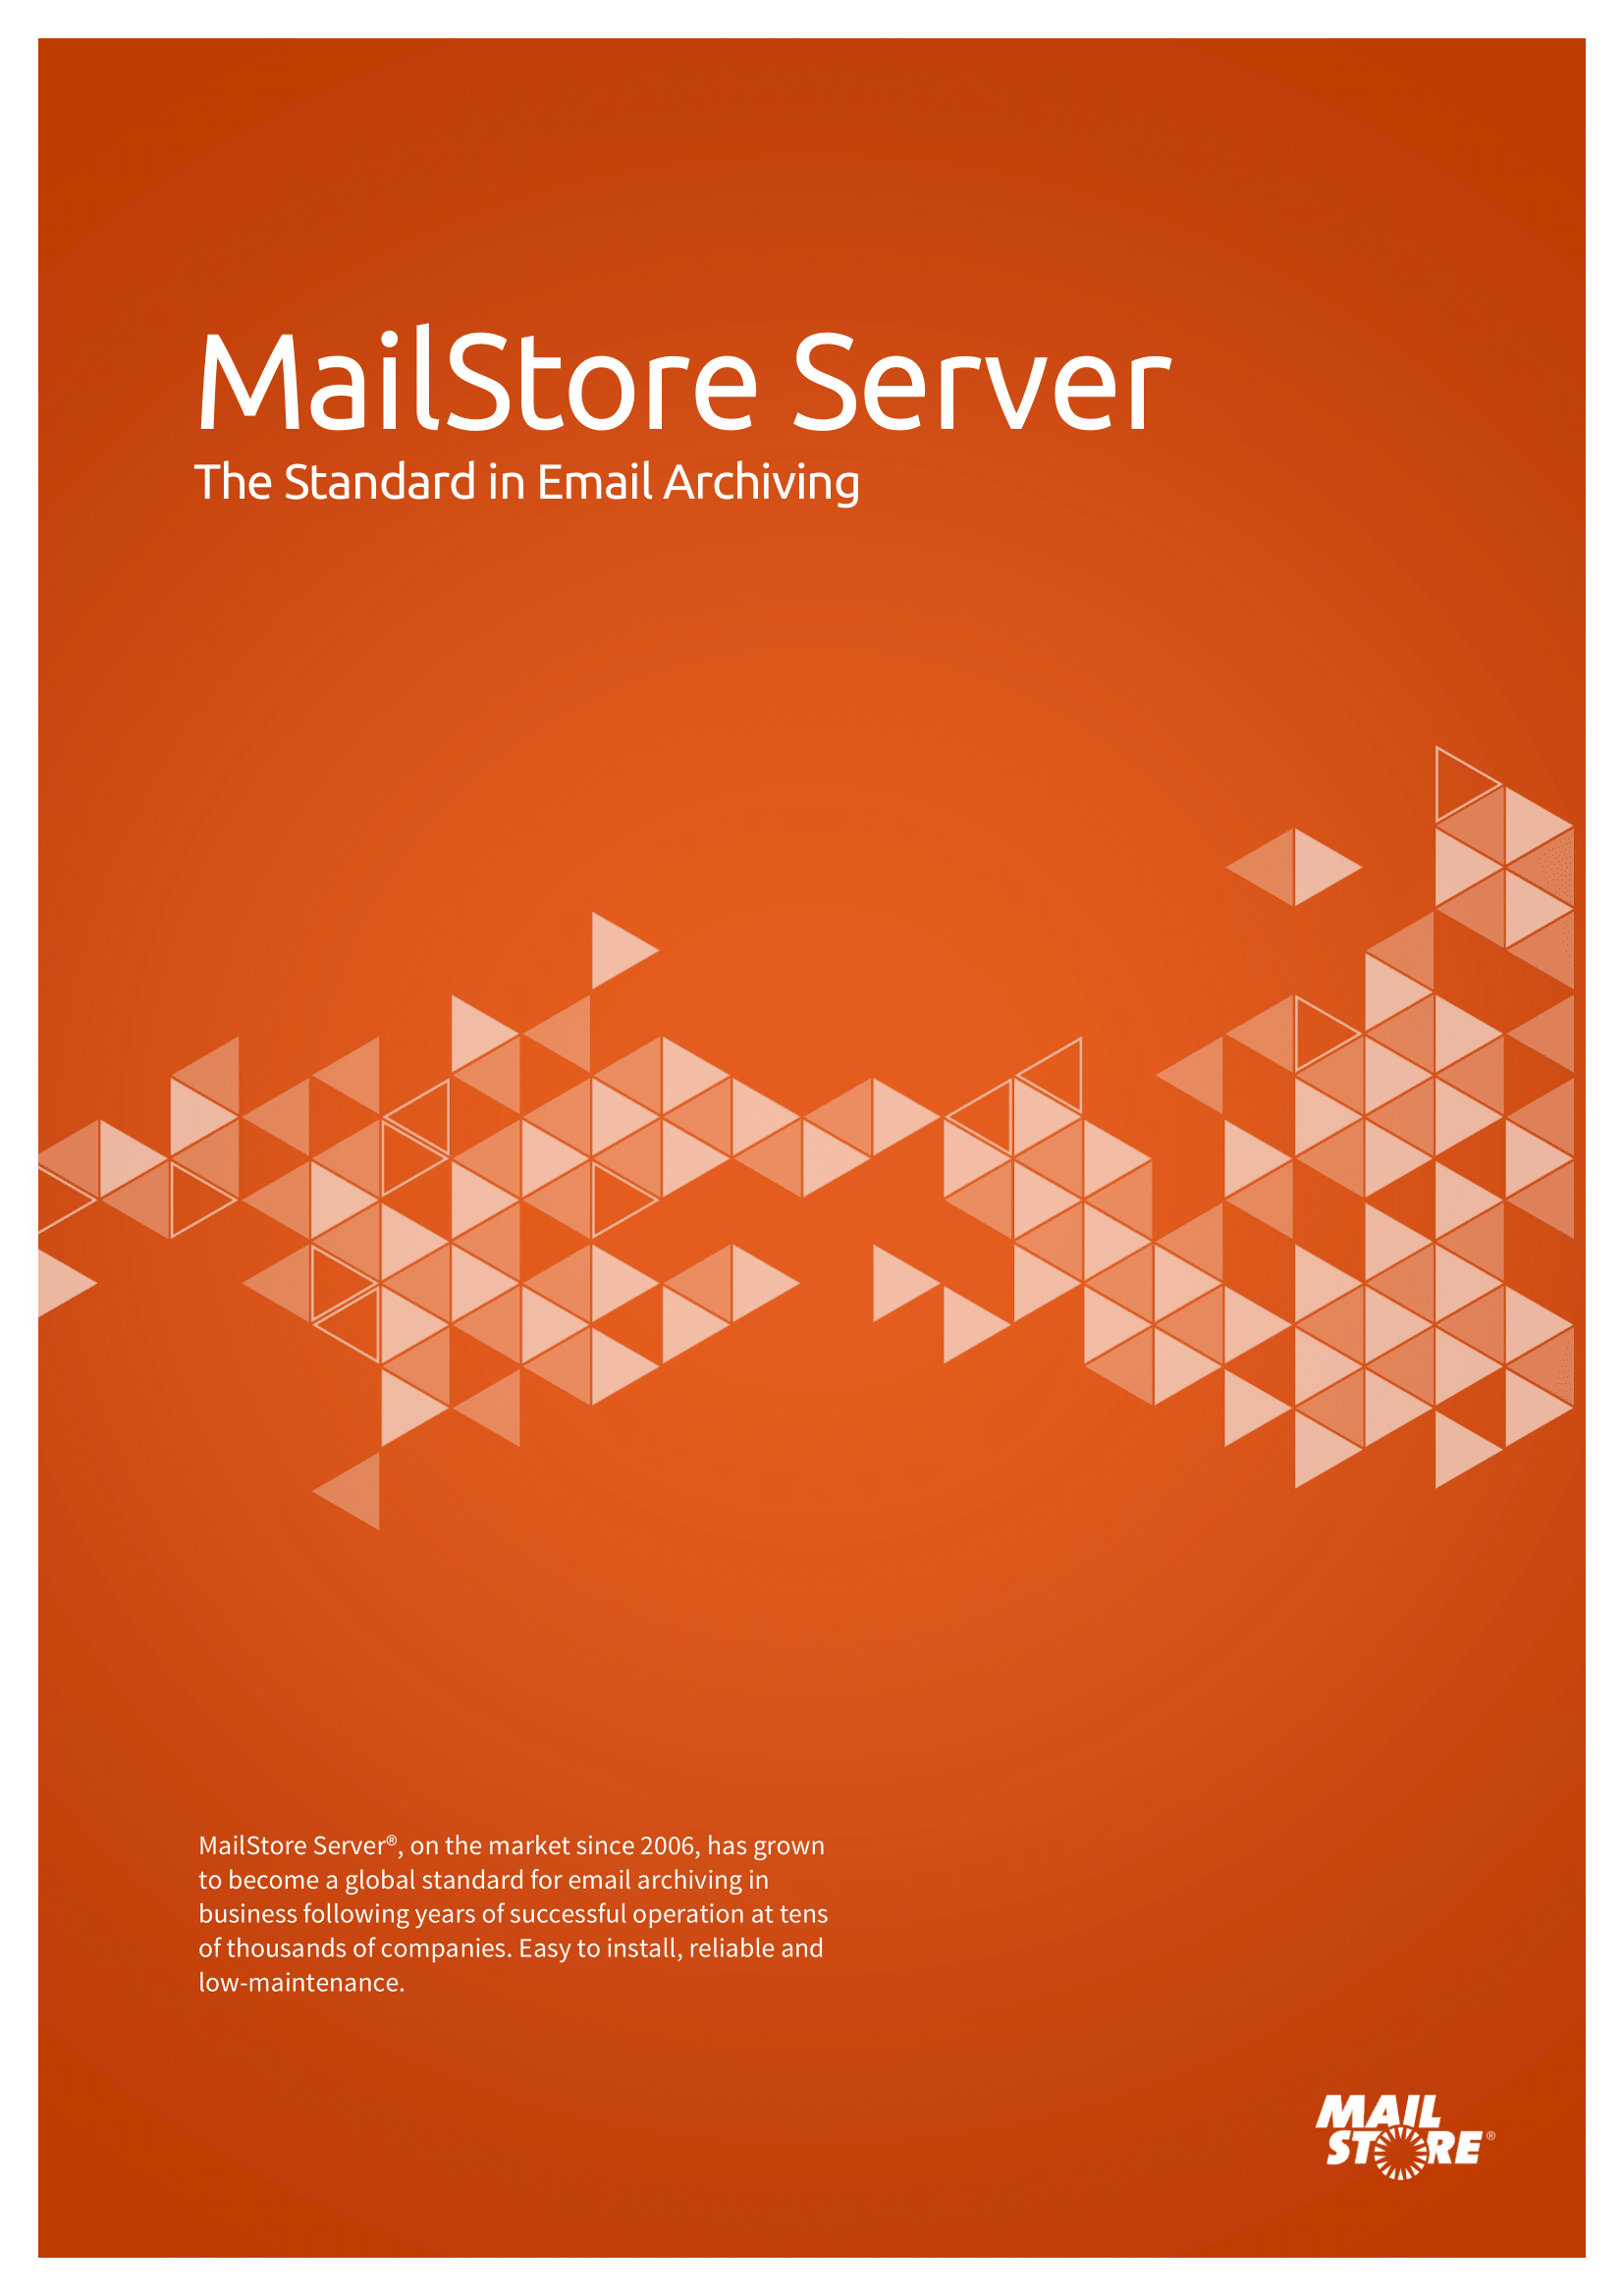 Mailstore Server Email Archiving - Product Overview - Bulwark Technologies